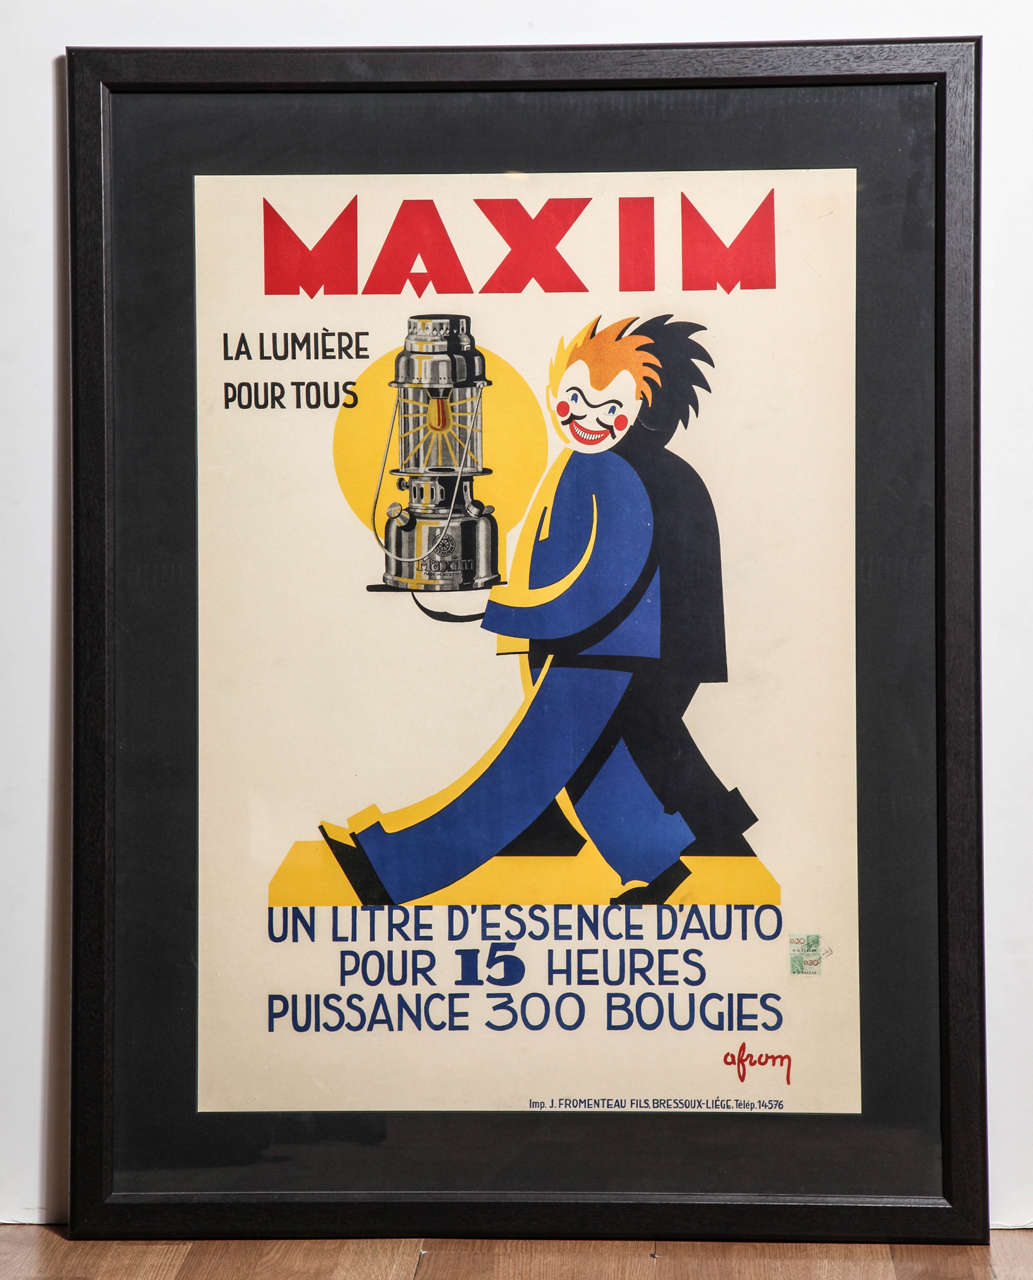 Original deco poster, France, by Afrom.